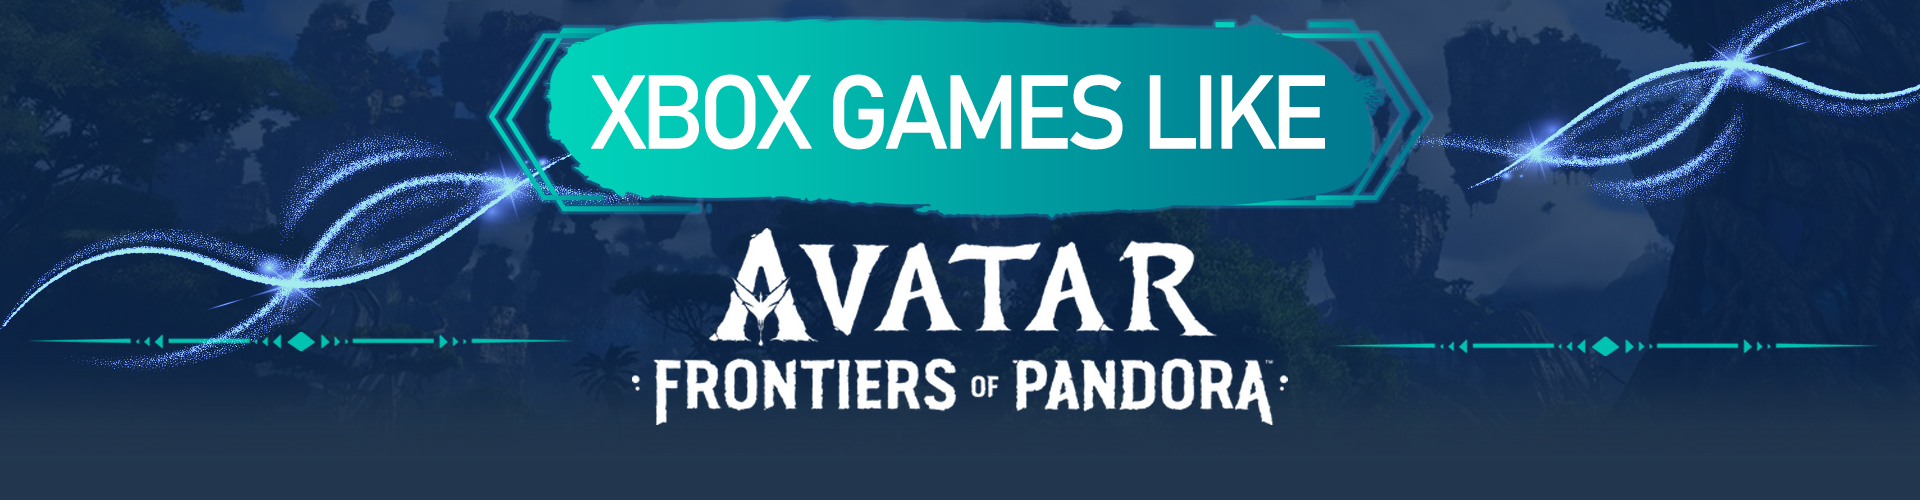 Xbox Games Like Avatar Frontiers of Pandora